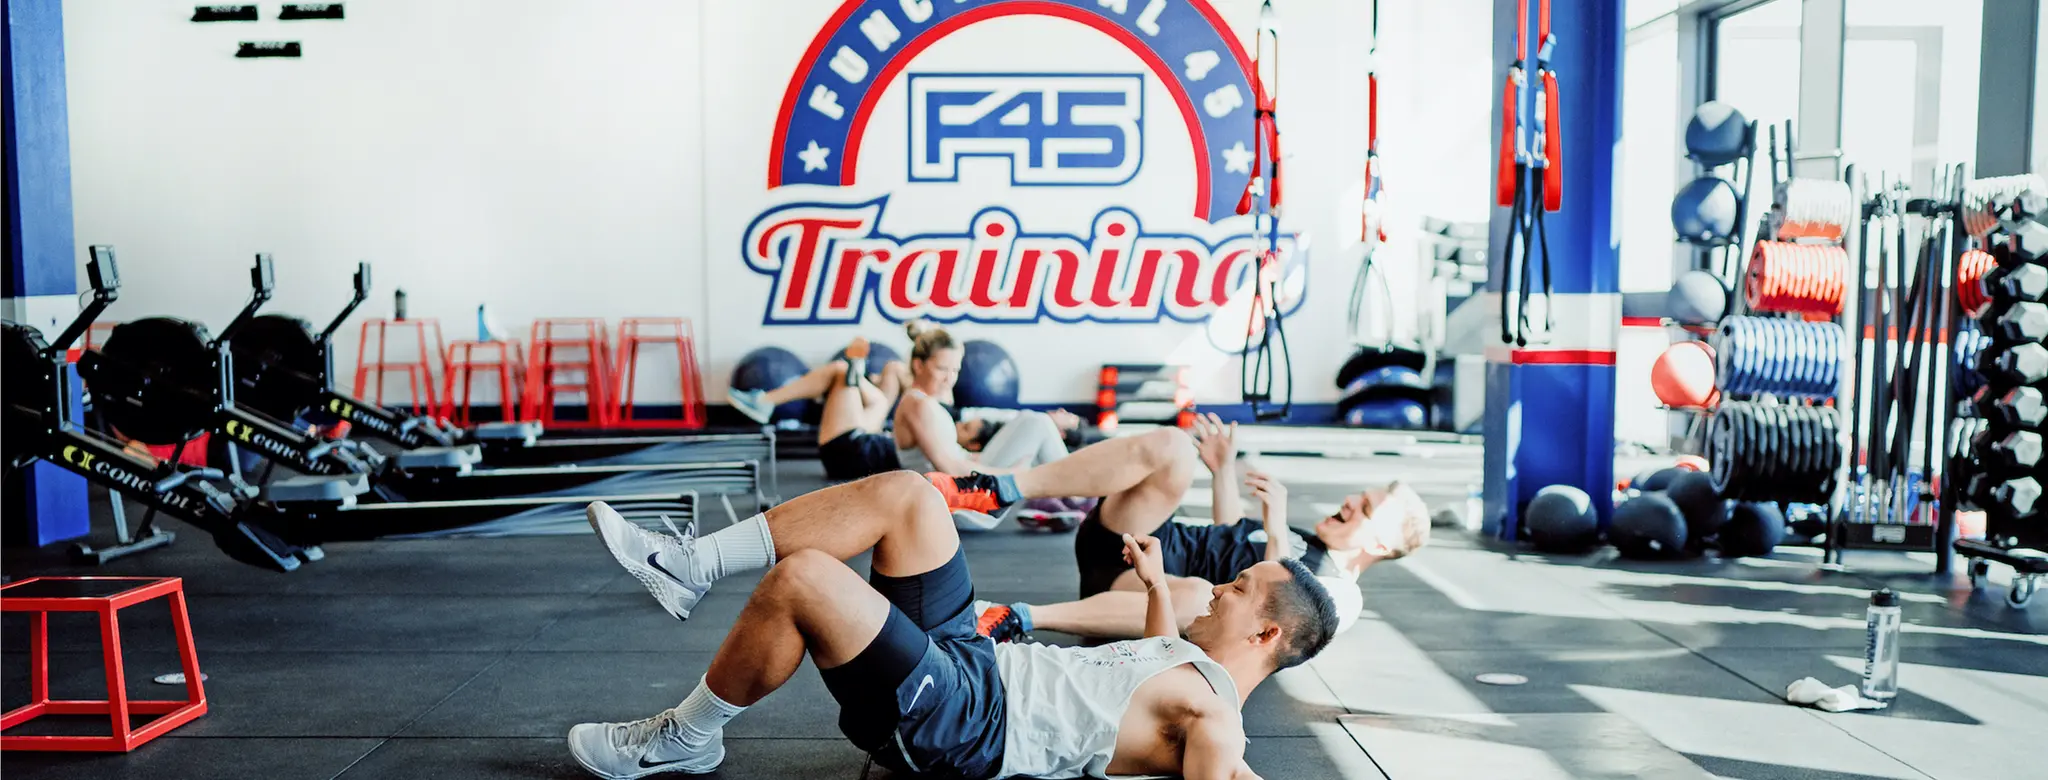 men working out at F45 gym